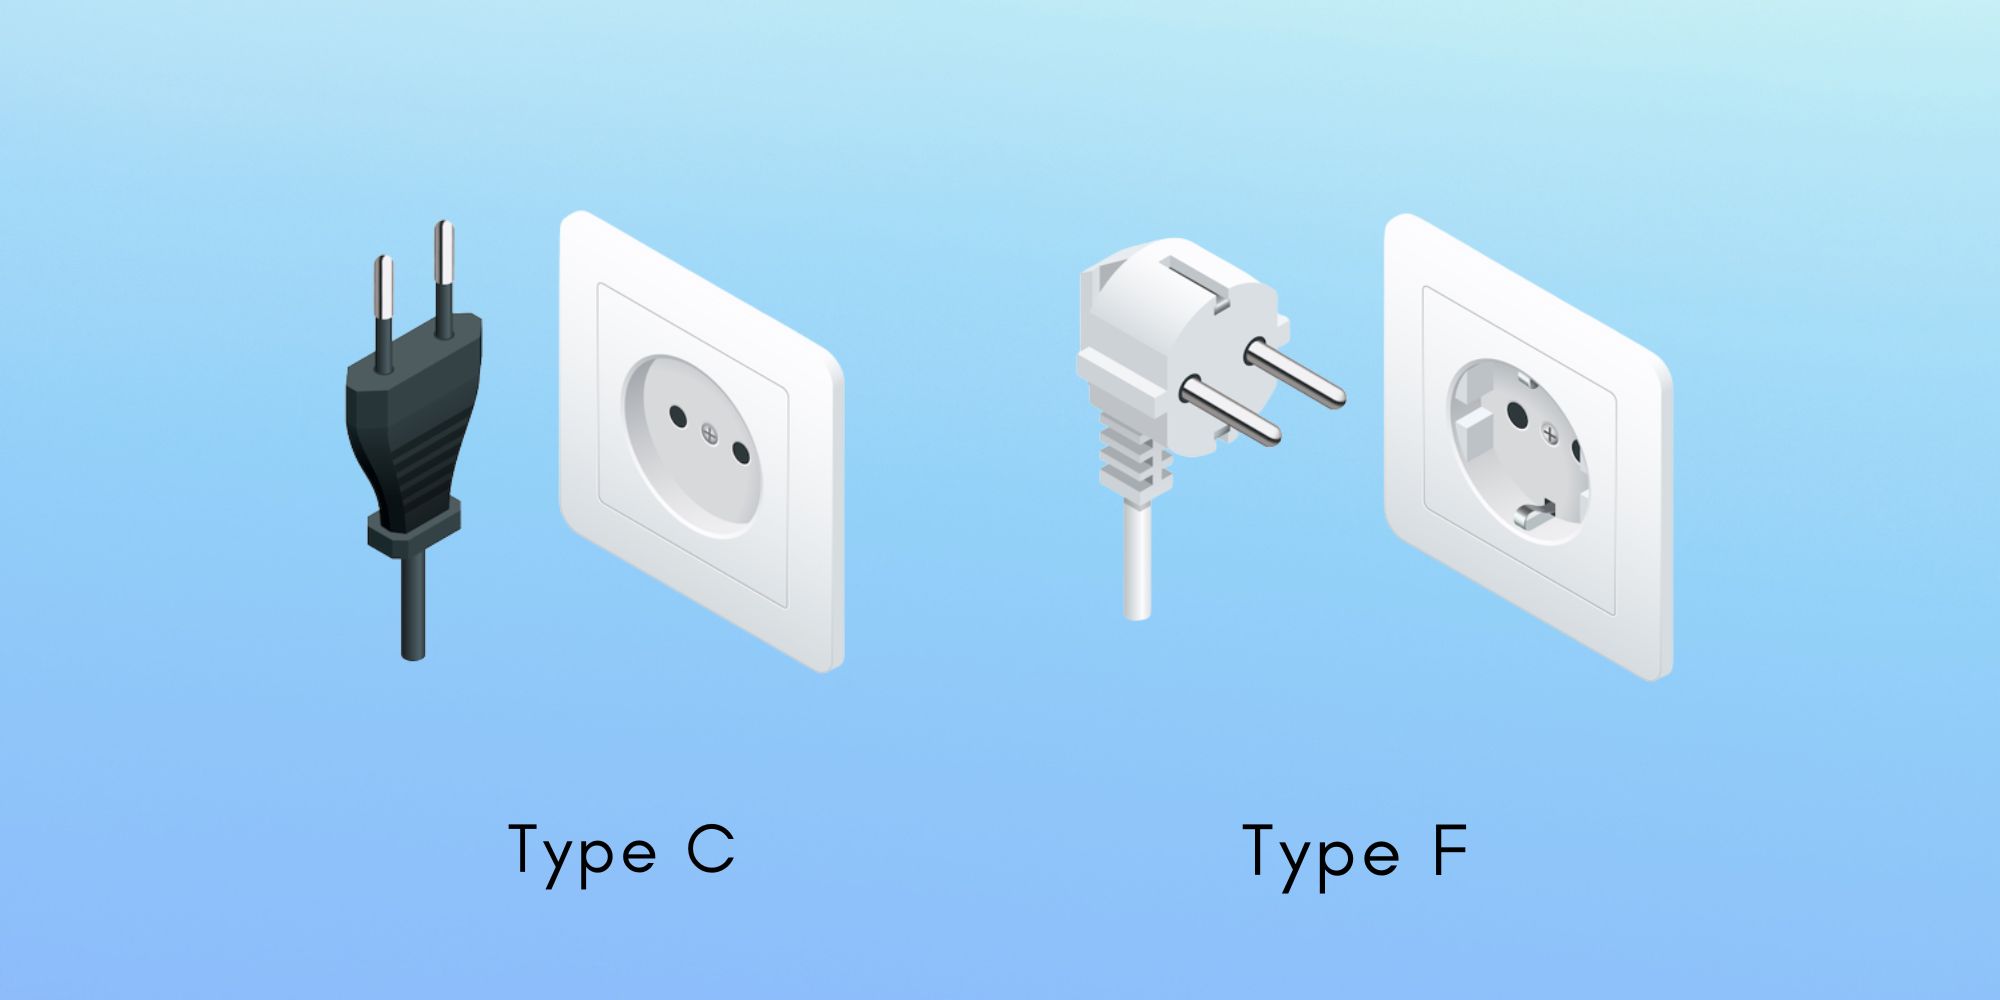 Sweden Power Plugs and Sockets: Type C and Type F
